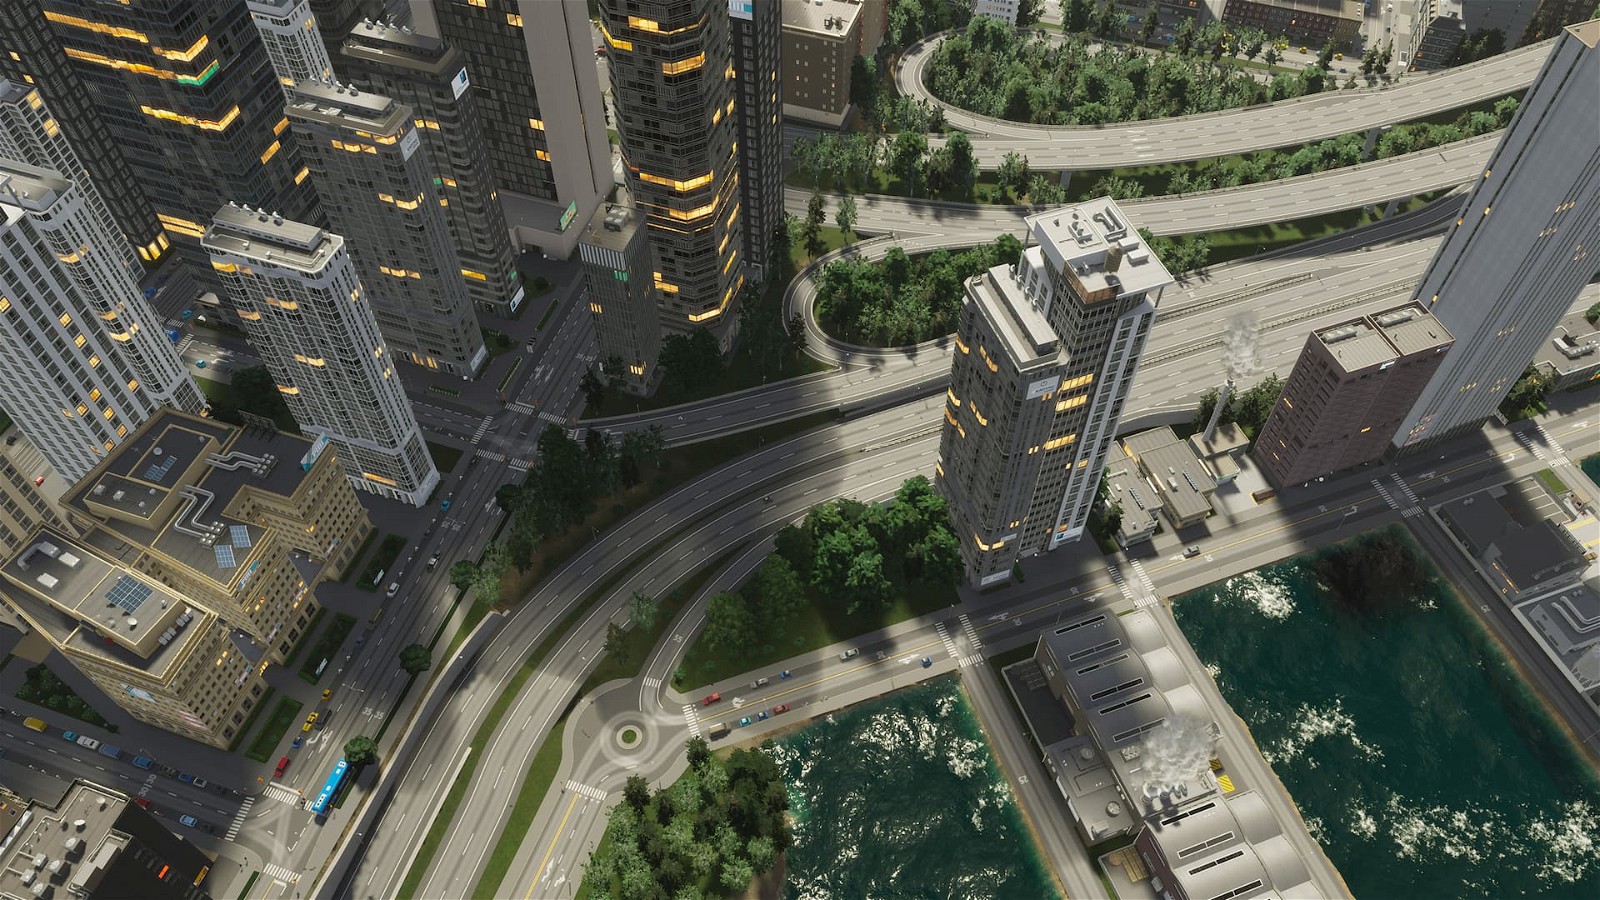 The developers look to work on quality and performance of Cities Skylines 2 in this time frame